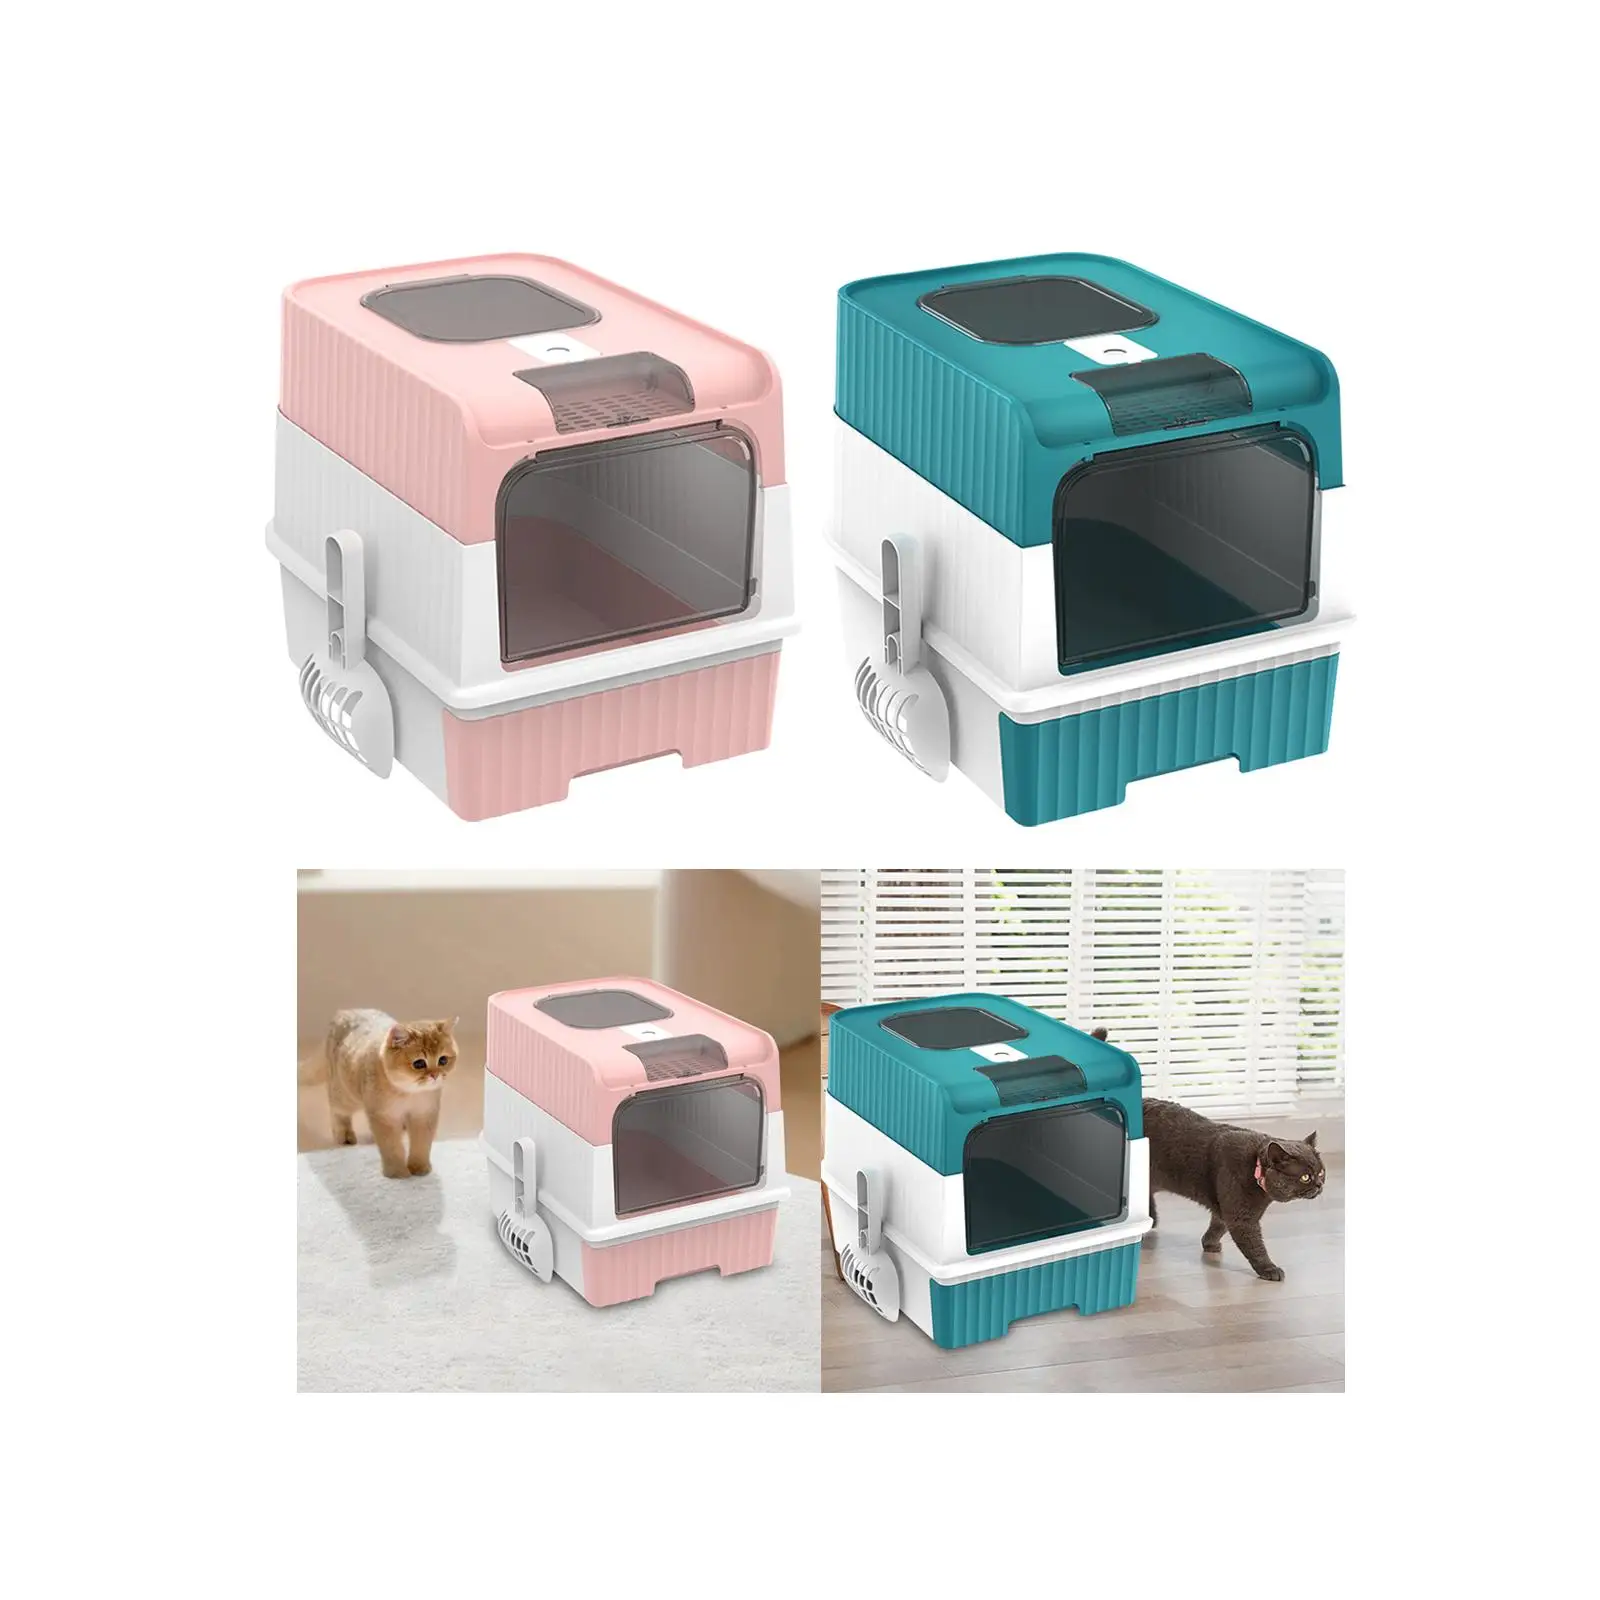 Hooded Cat Litter Boxes Pet Litter Tray Pet Supplies Privacy Cat Litter Tray Large Enough Durable Cat Toilet Kitten Potty